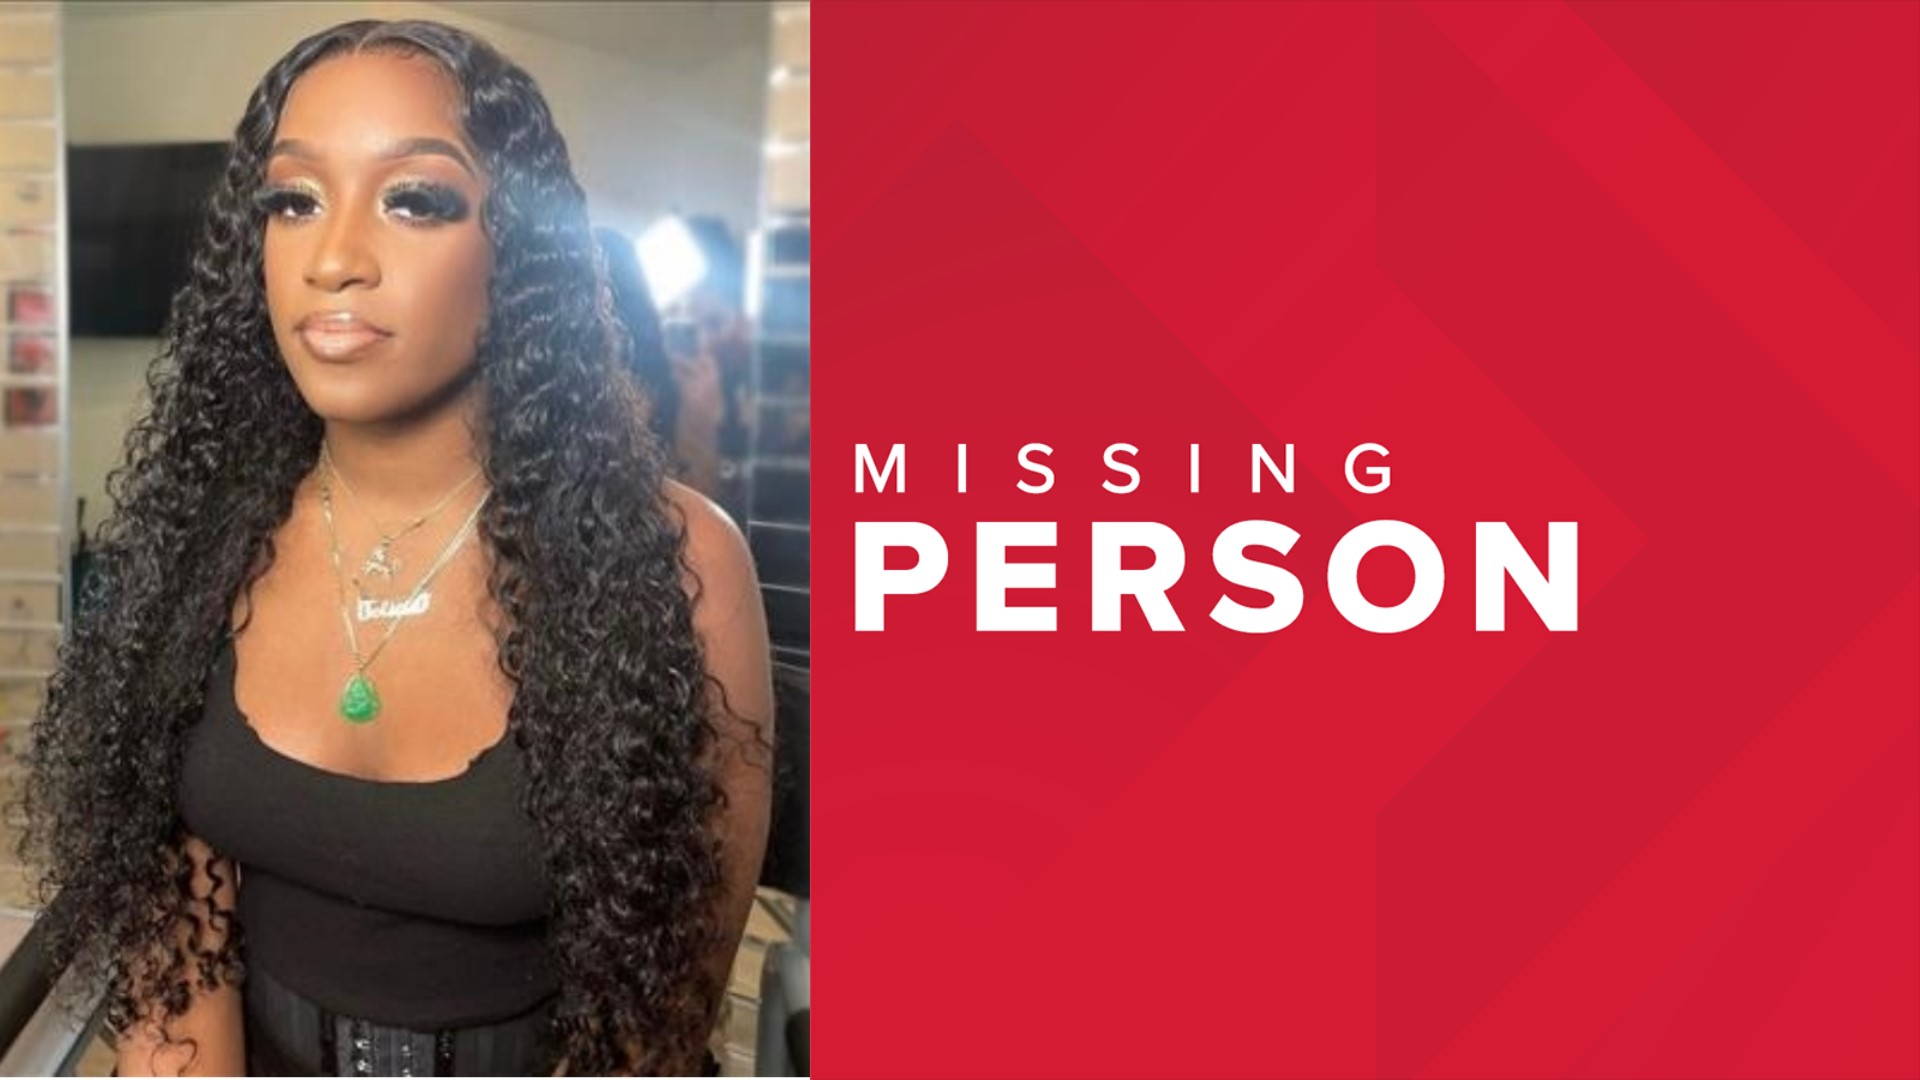 Felicia Johnson was last seen at the Cover Girls Night Club on Little York. Anyone with info should call Houston Police Missing Persons Division at (832) 394-1840.